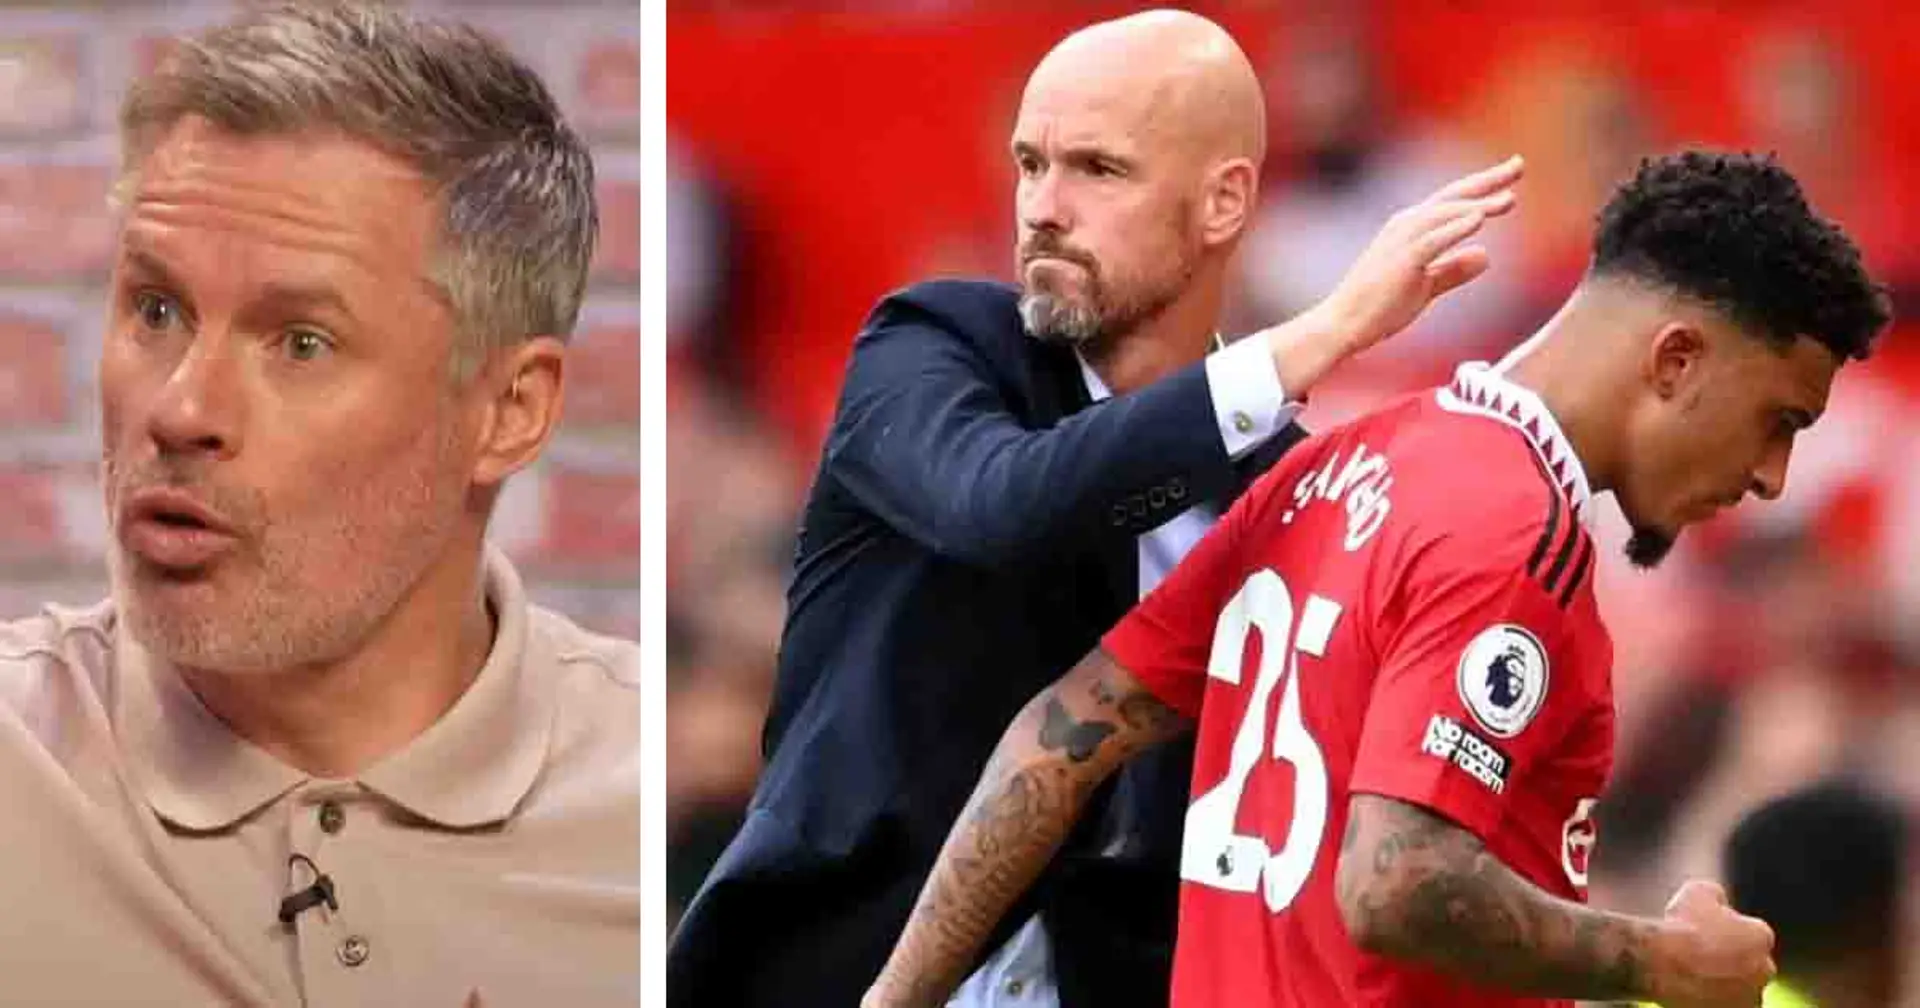 'He dealt with it head-on': Jamie Carragher praises Ten Hag's handling of two players at Man United